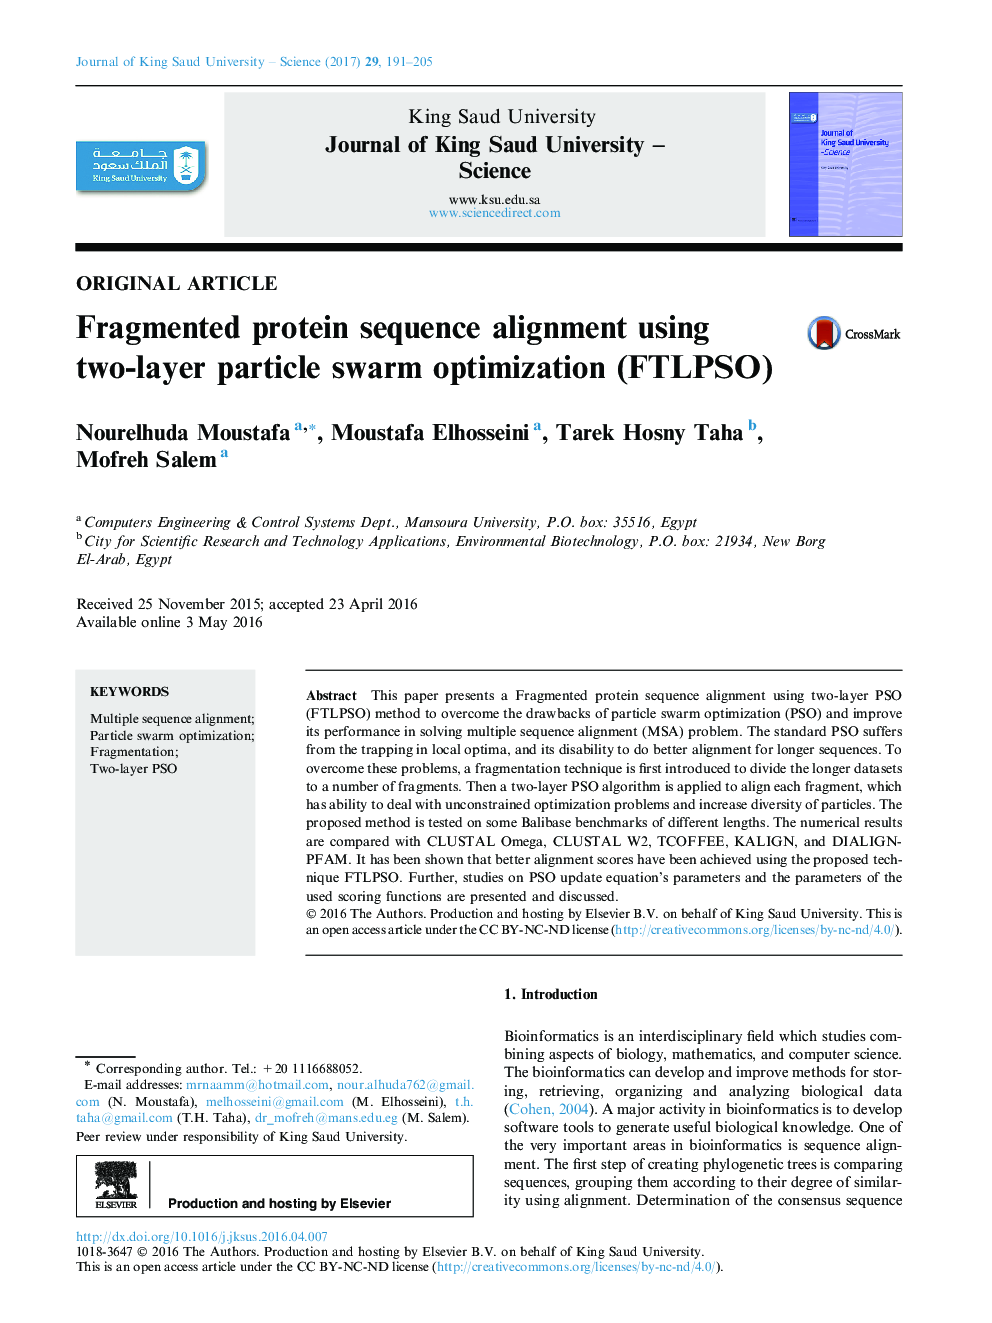 Original articleFragmented protein sequence alignment using two-layer particle swarm optimization (FTLPSO)